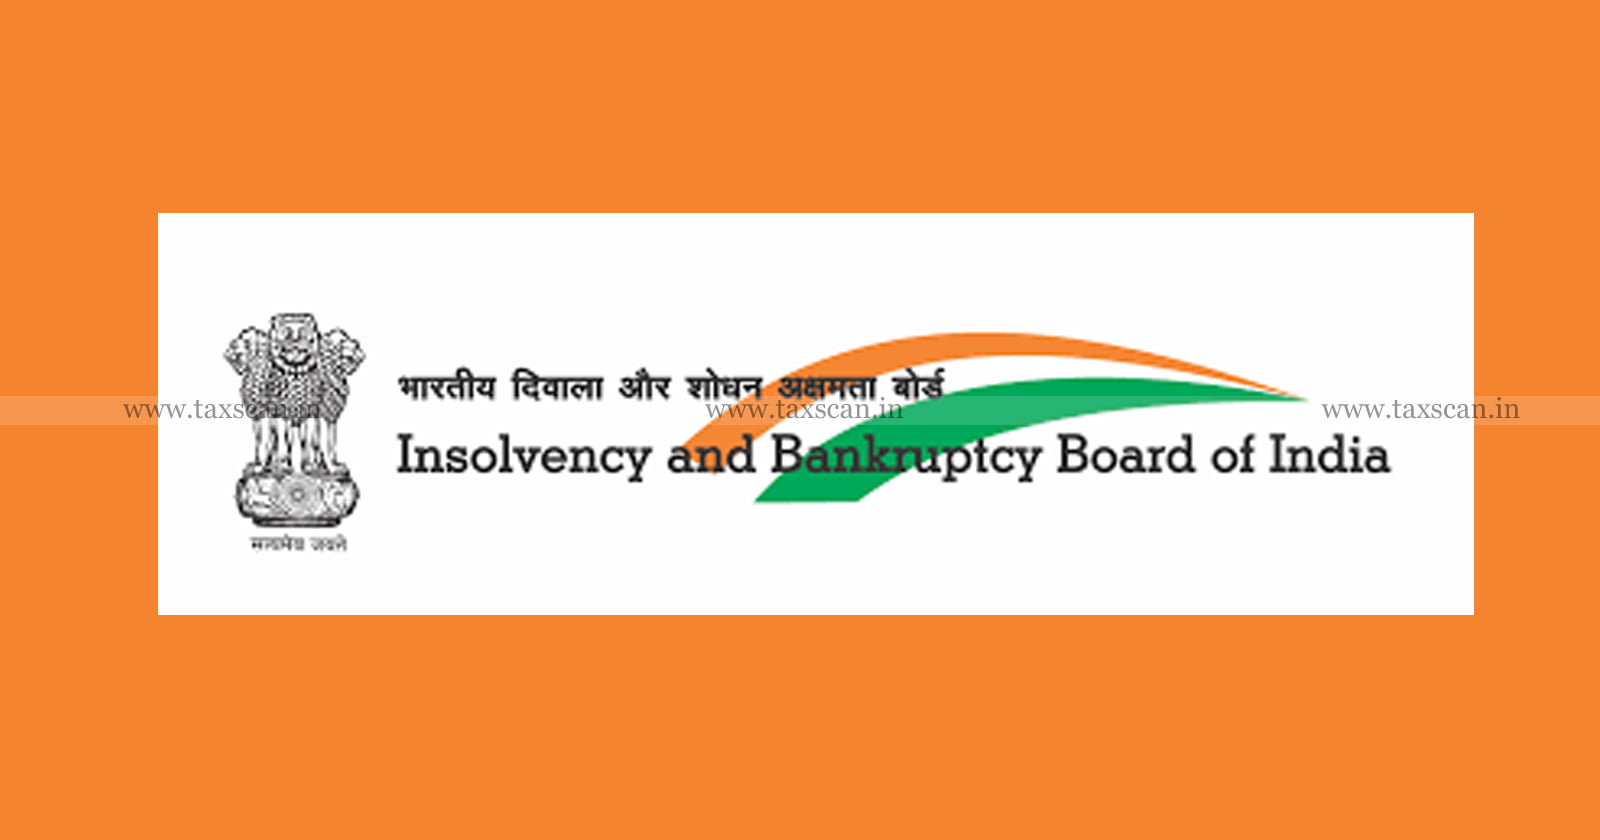 IBBI - Insolvency and Bankruptcy Board of India - CIRP Regulations - CIRP - corporate insolvency resolution process - Taxscan